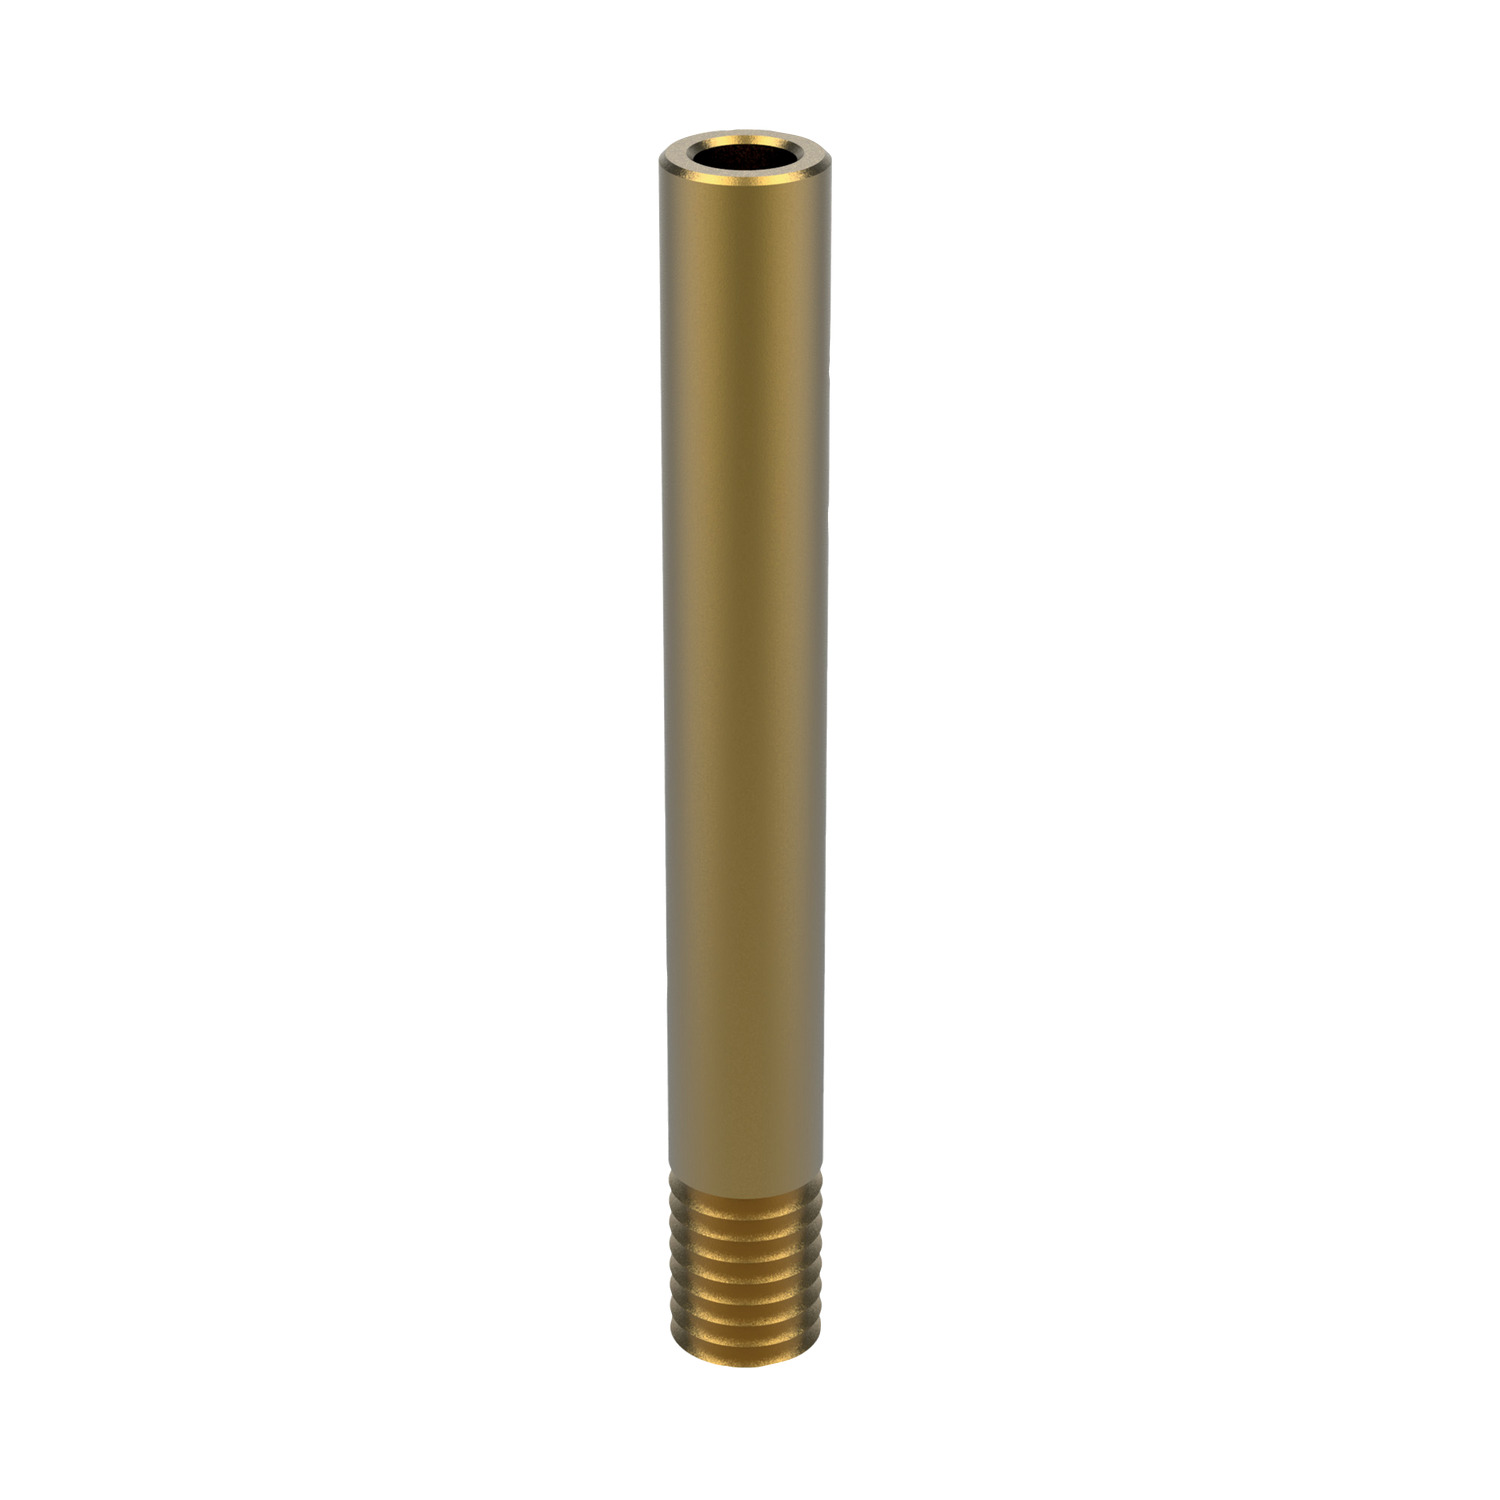 Extension Tube - For Coolant Nozzles For use with many of our coolant nozzles, or as stand alone units. Maximum pressure of 33 bars, temperature resistant to 170°C.